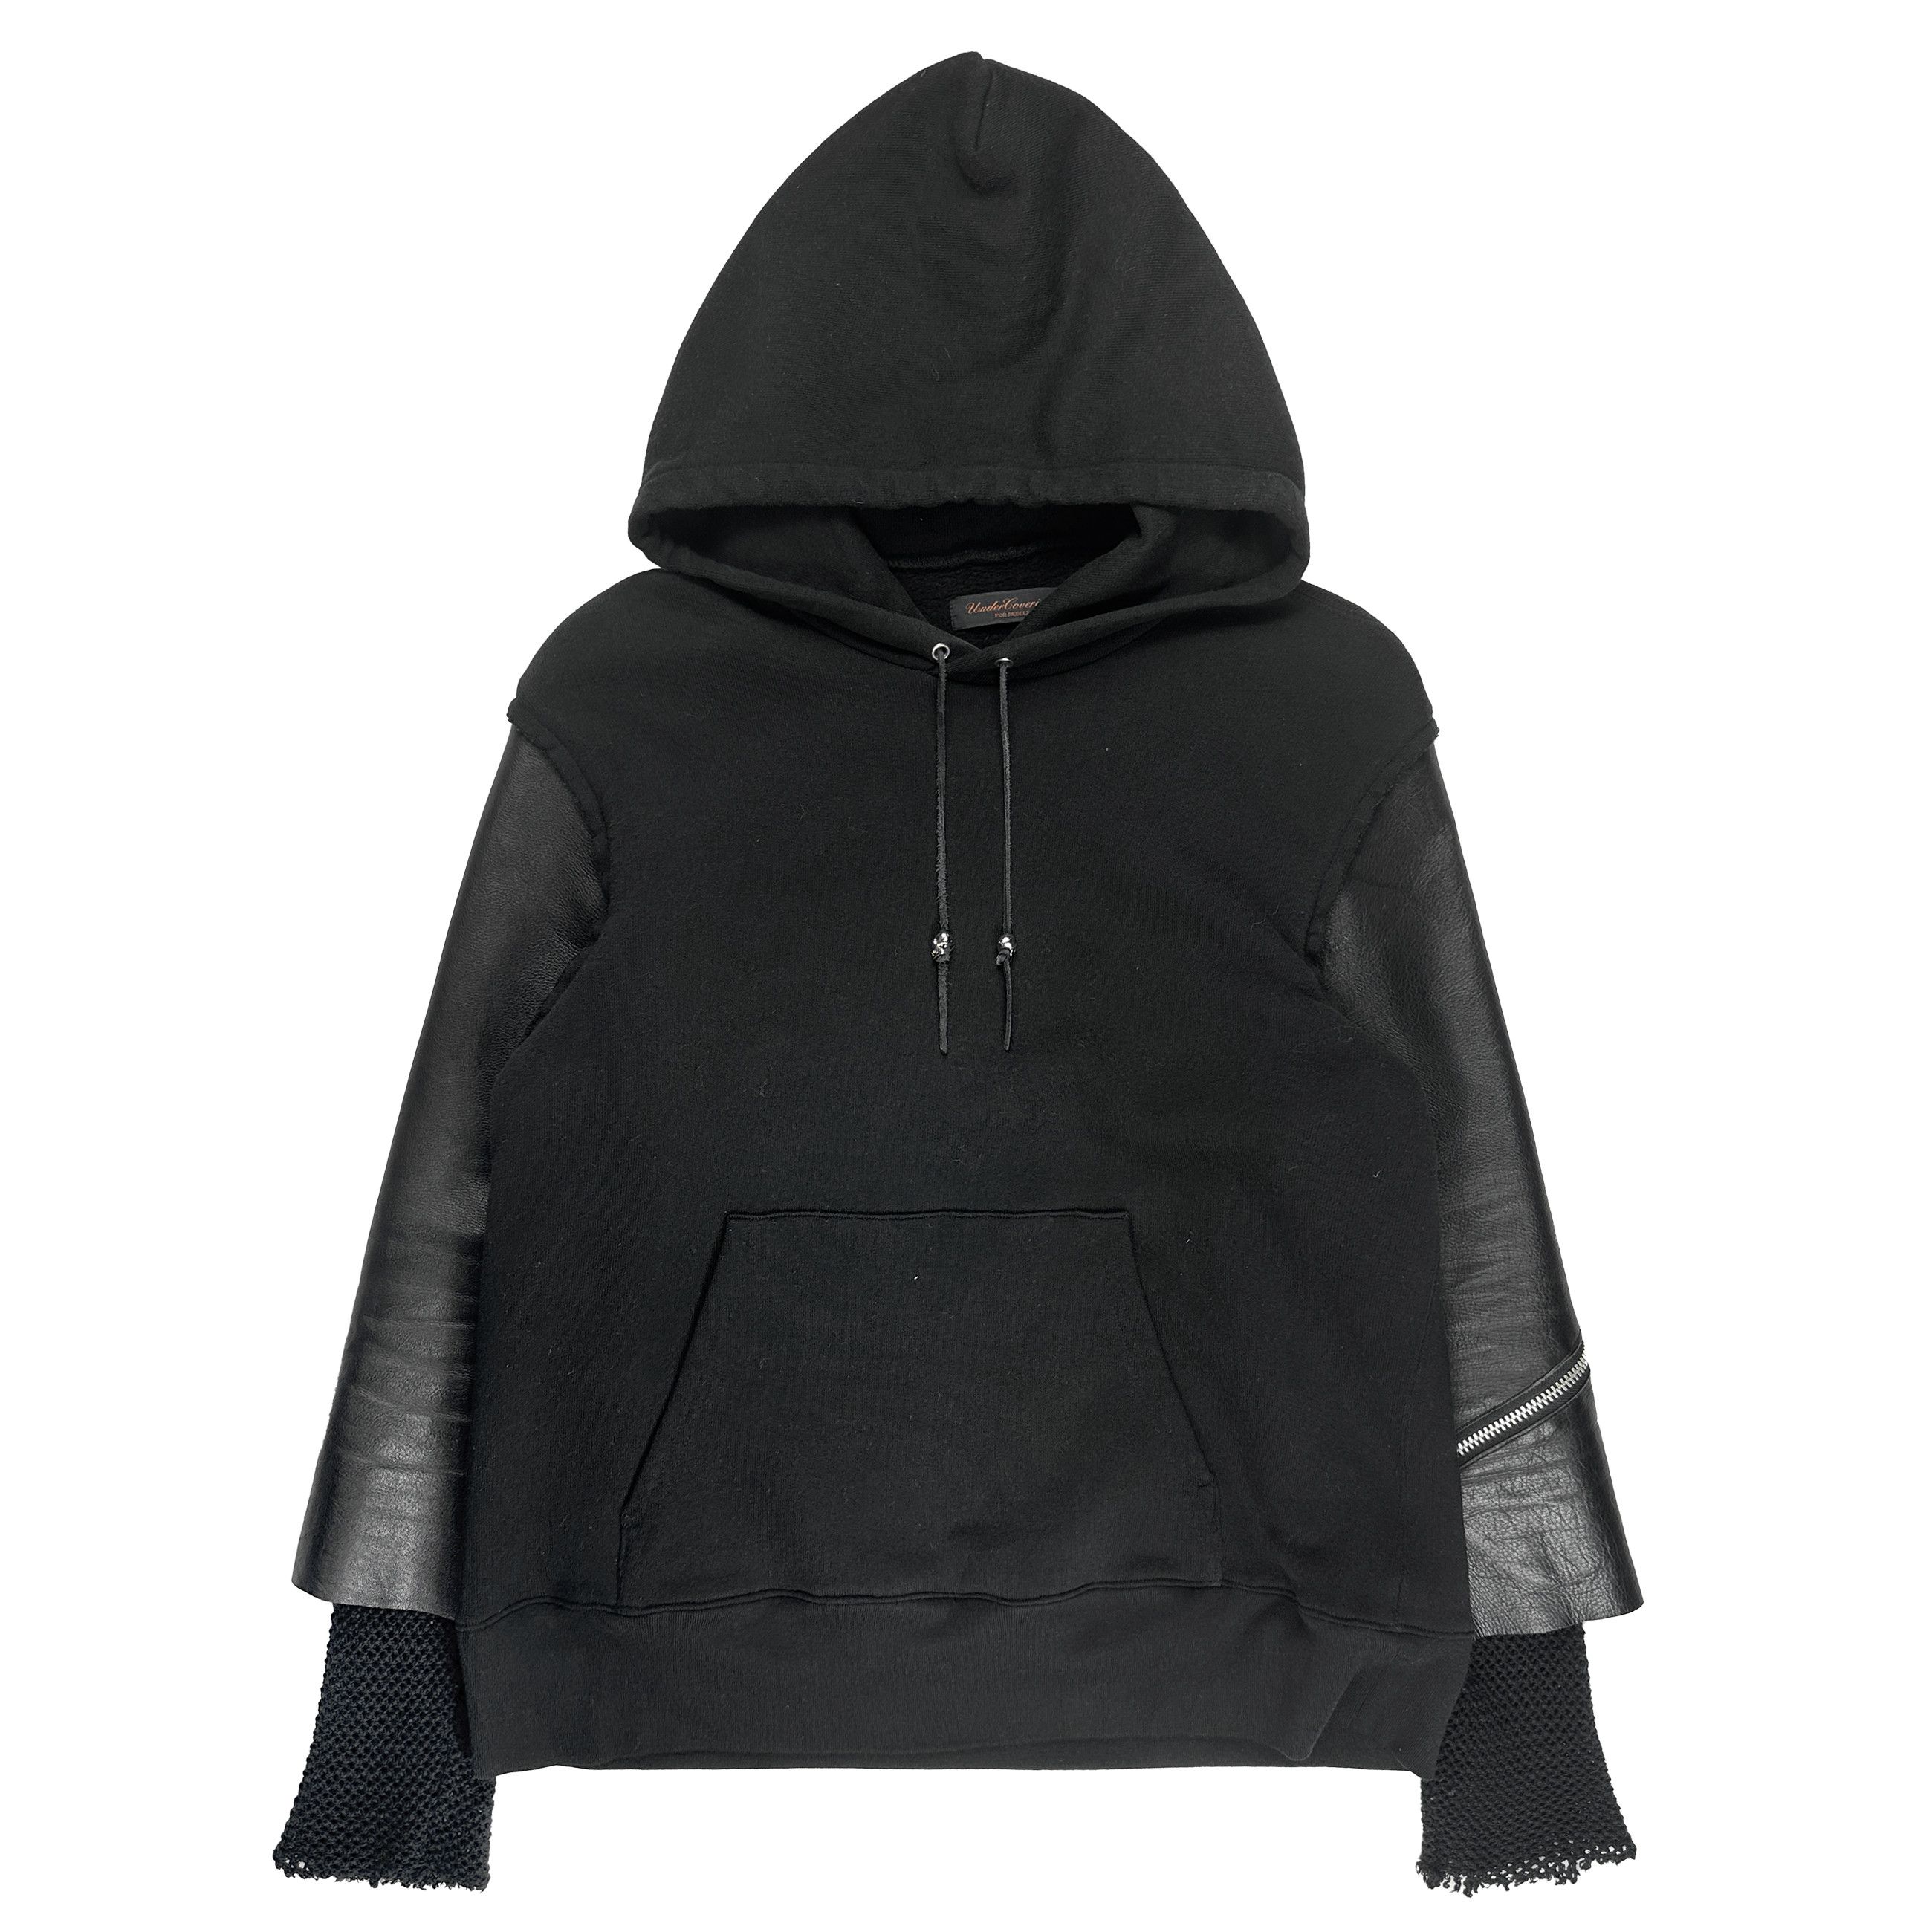 Undercover AW04 Leather Layered Hoodie | Grailed